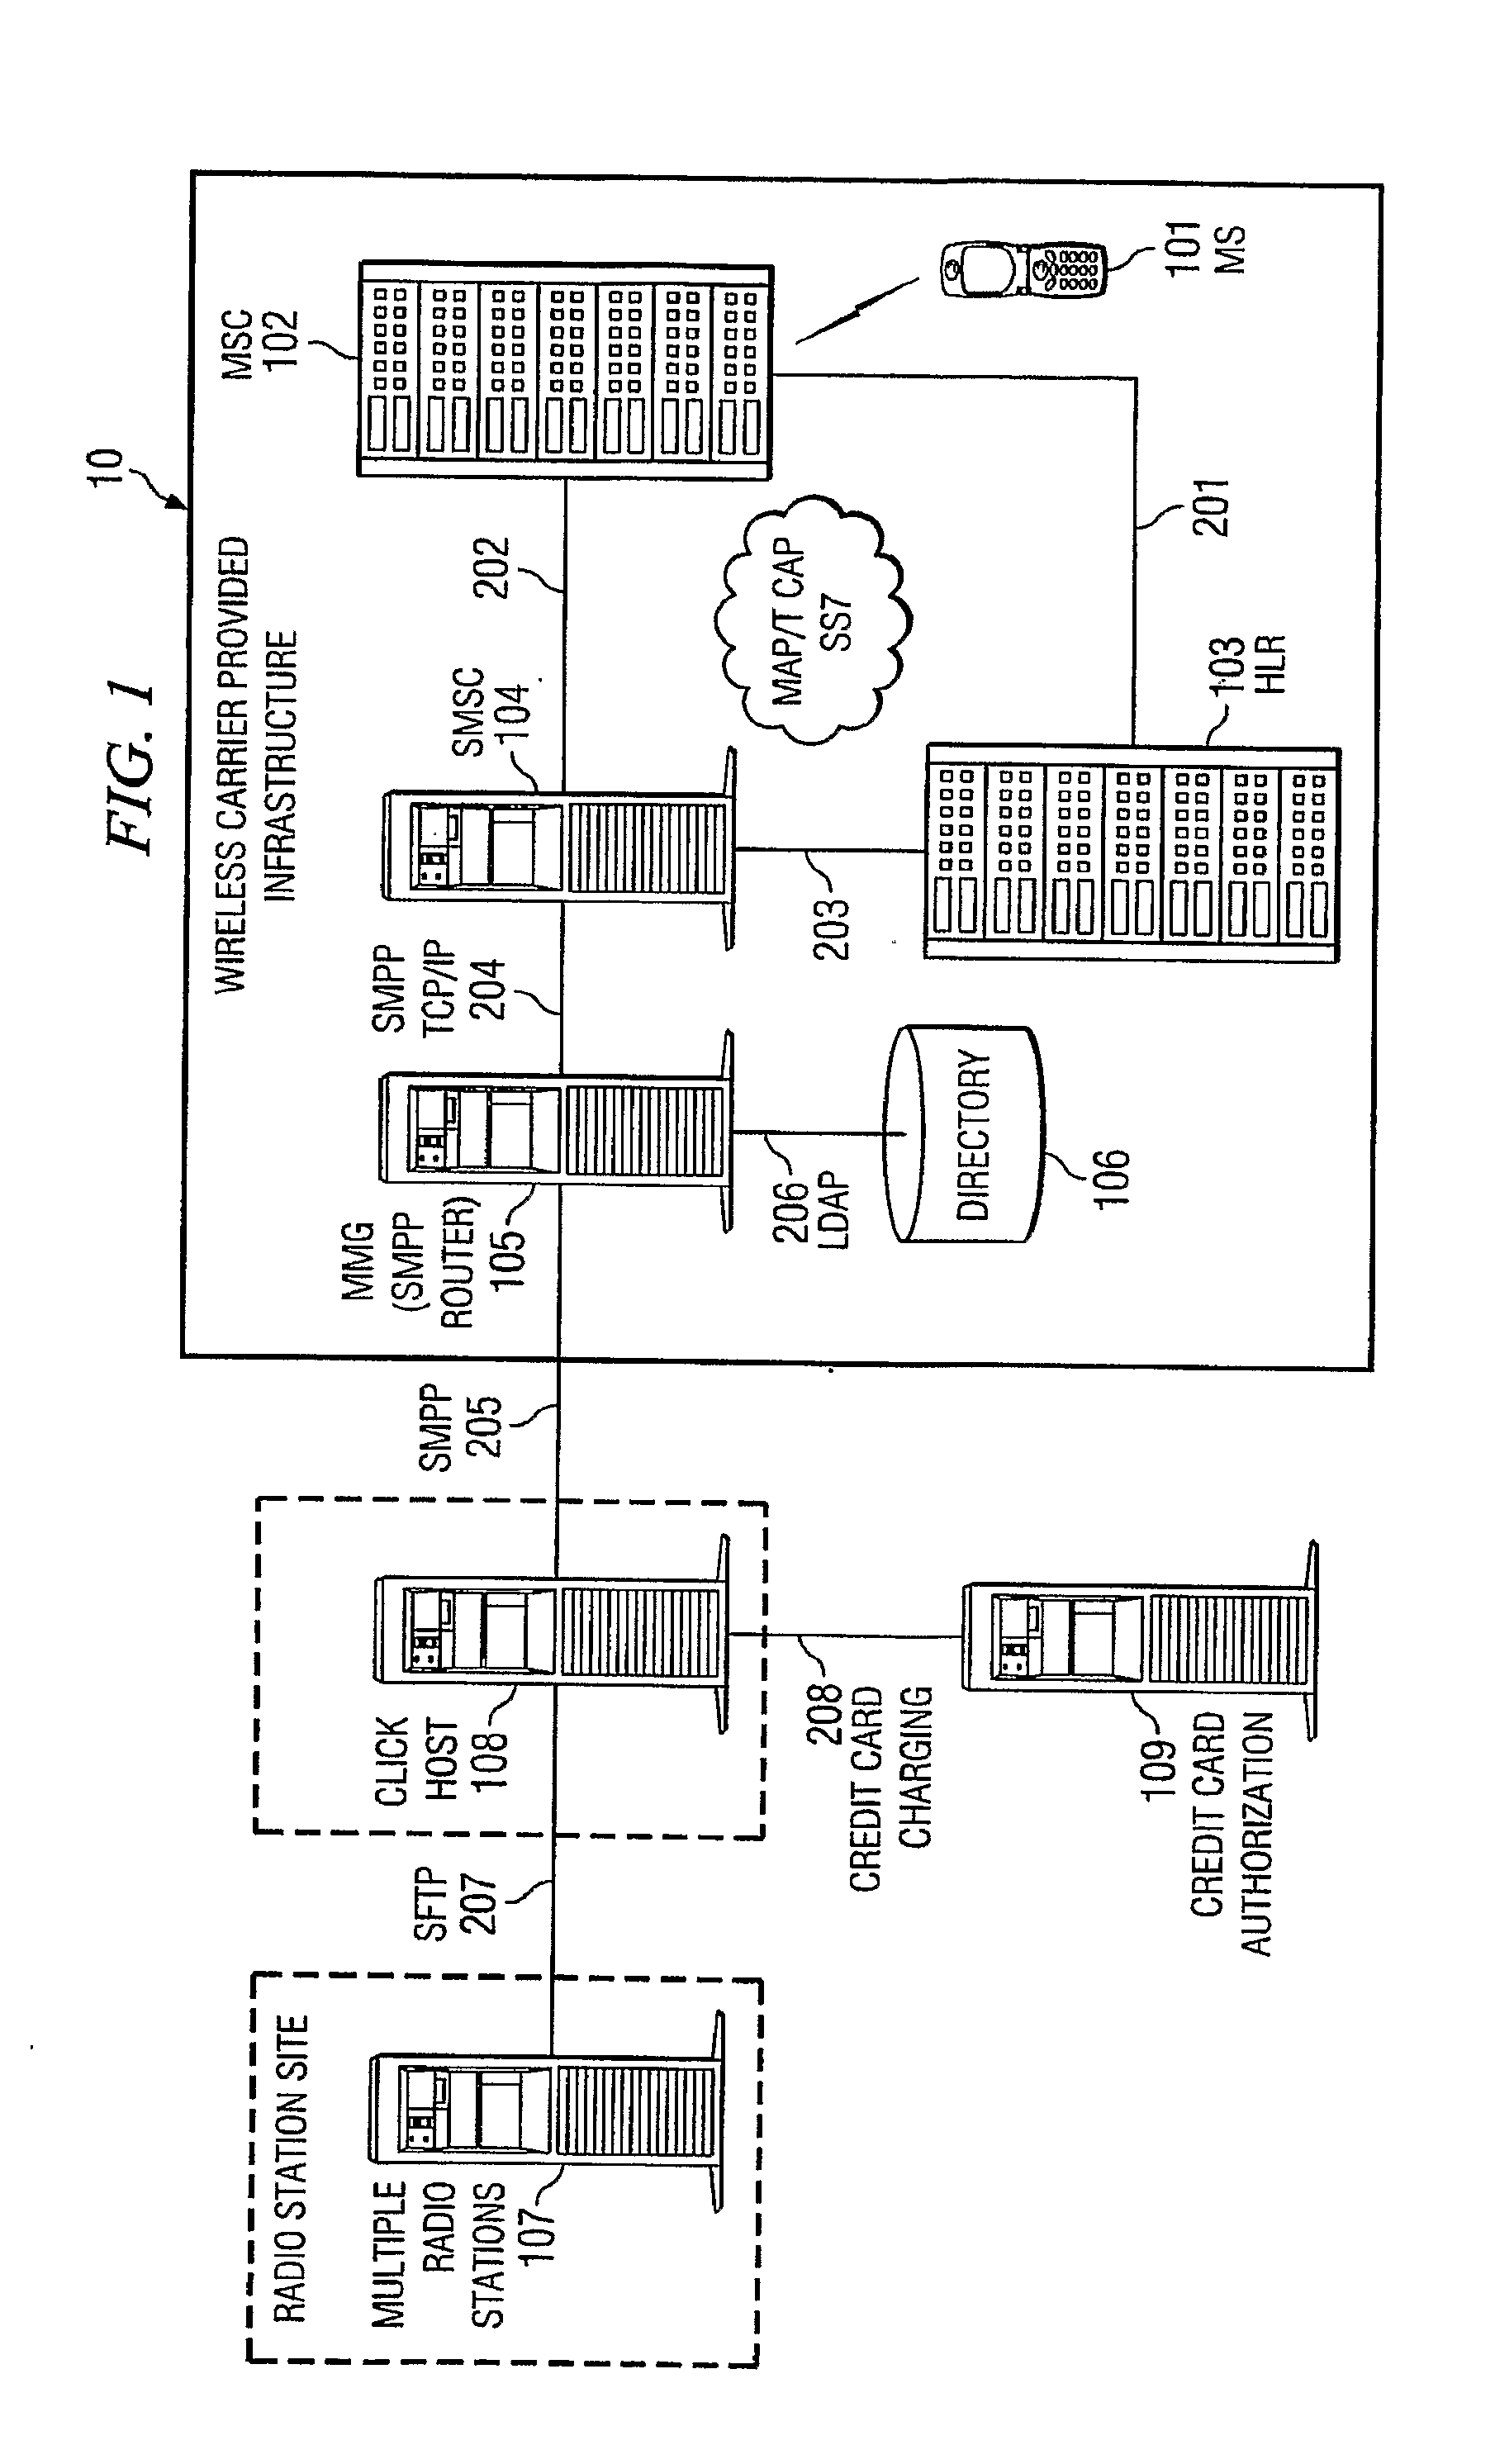 System and Method for Providing Commercial Broadcast Content Information to Mobile Subscribers